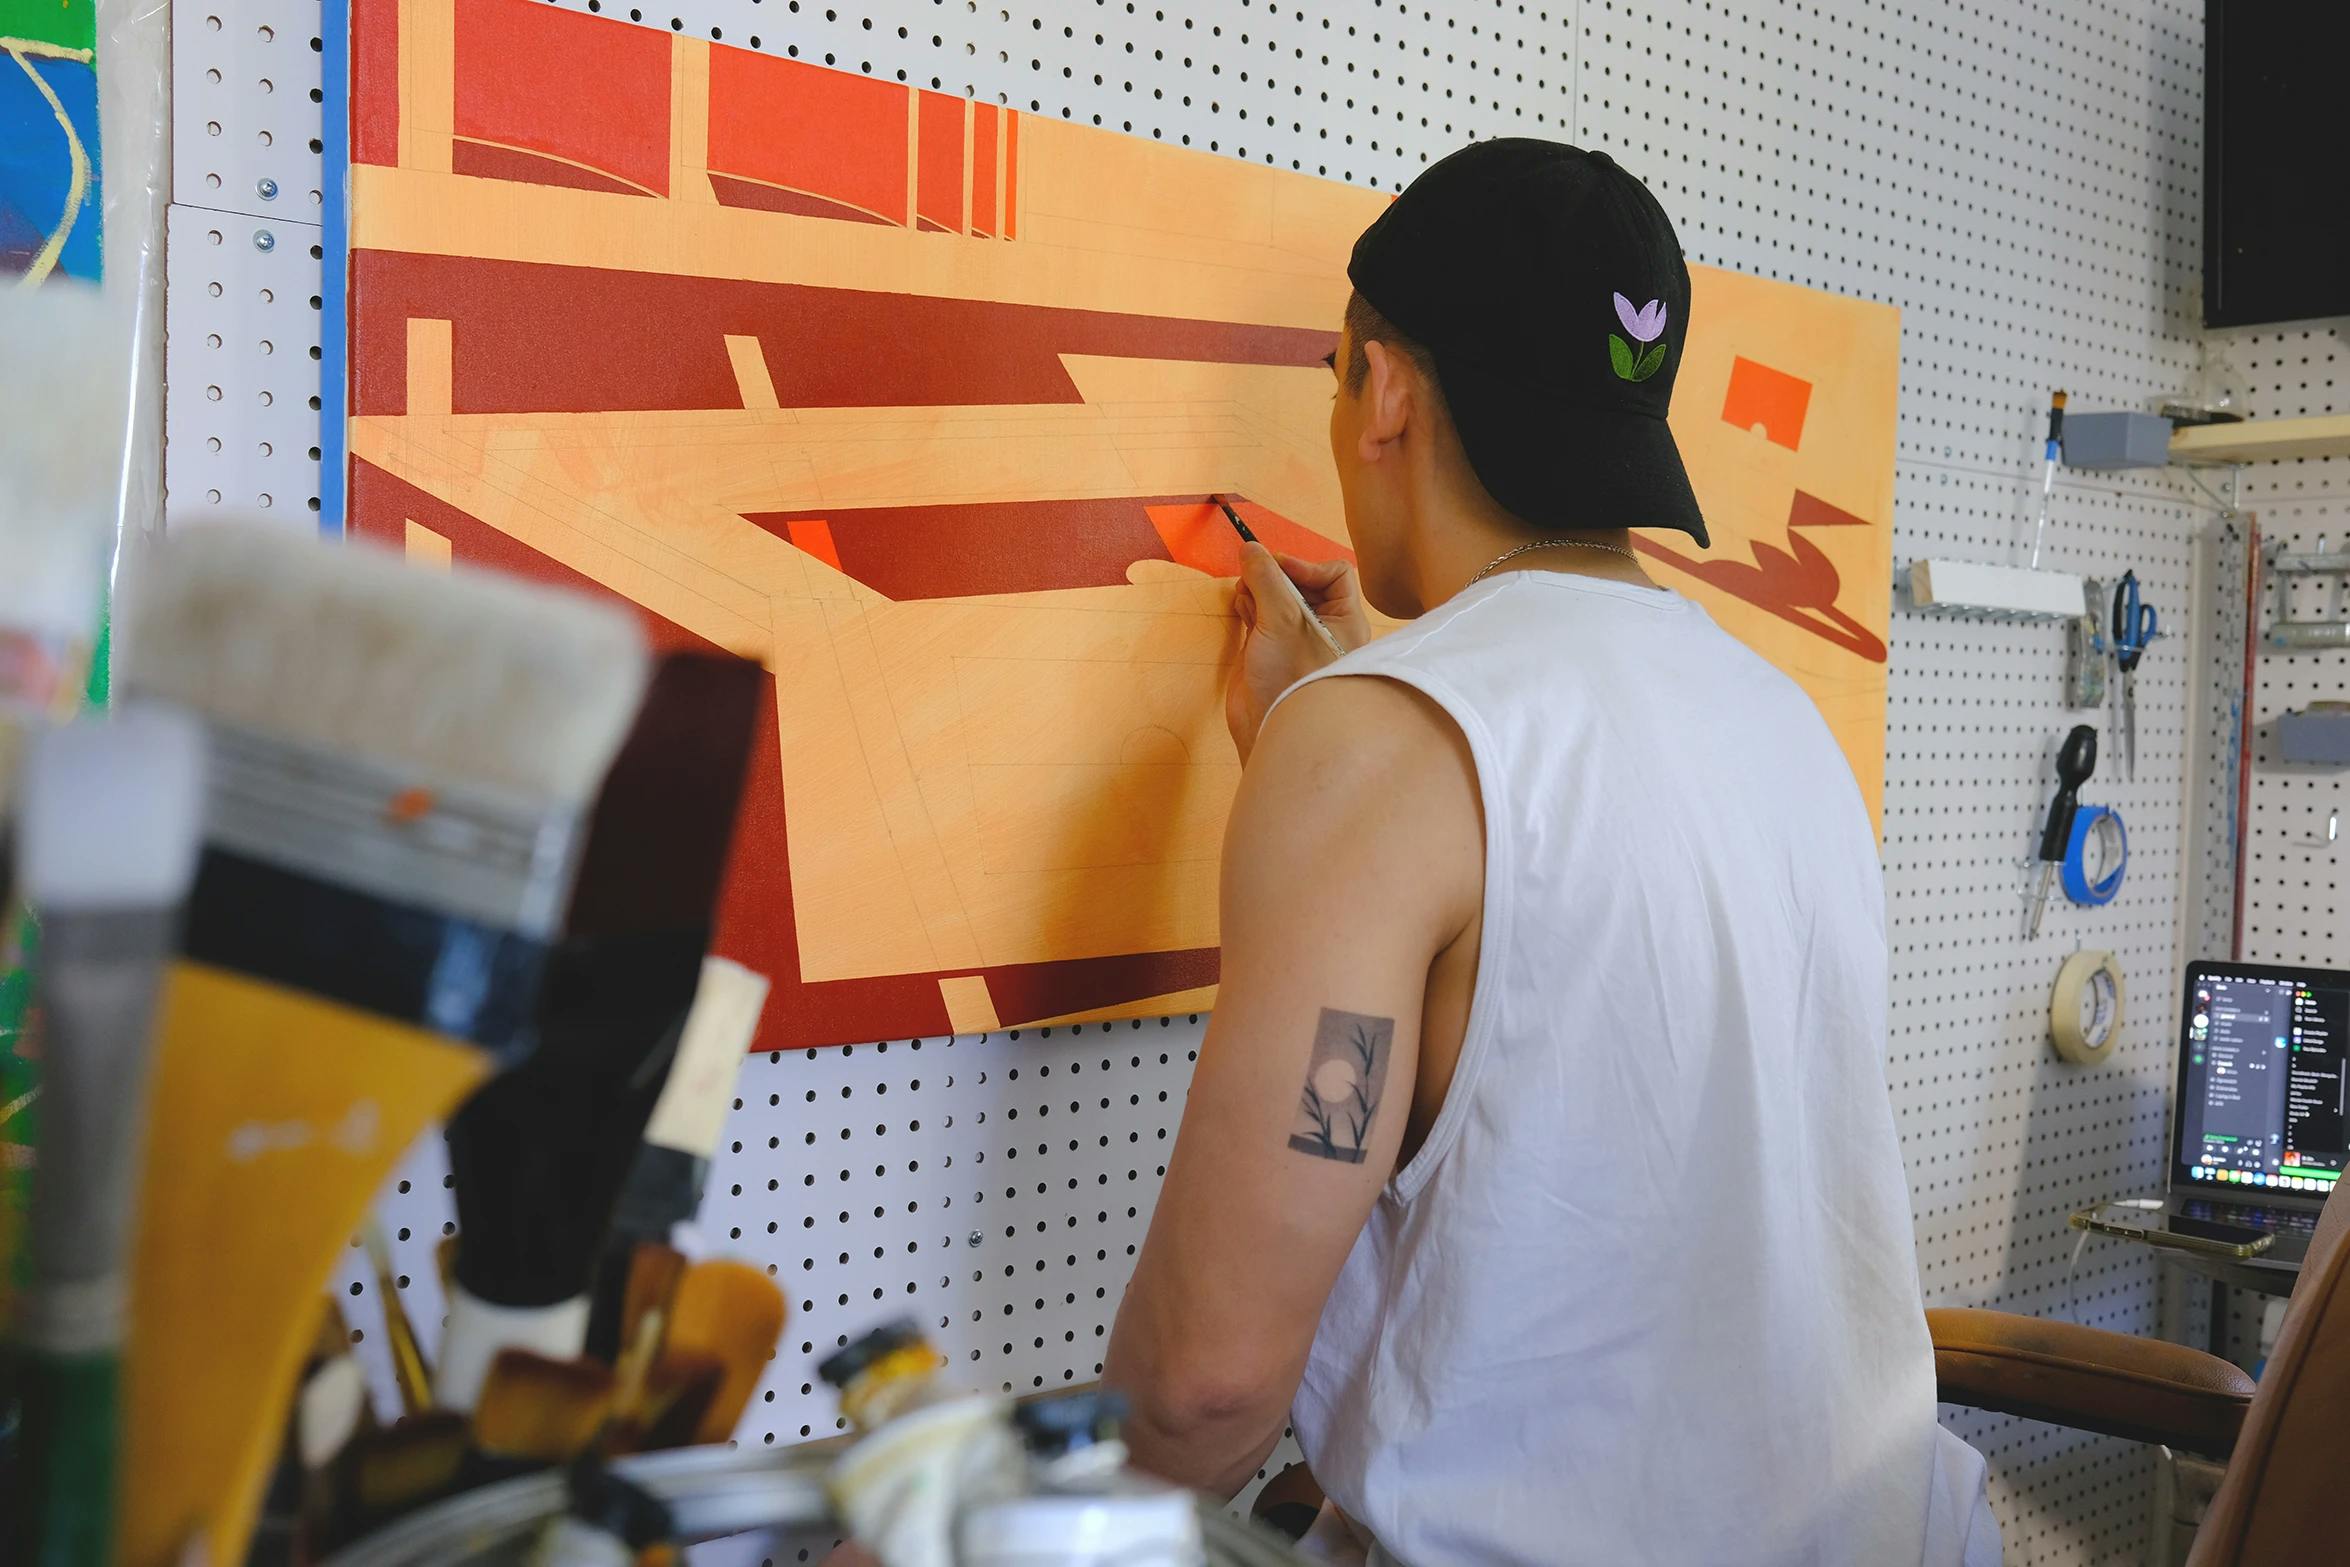 Artist Adrian Kay Wong painting an abstract, geometric orange canvas in his studio.